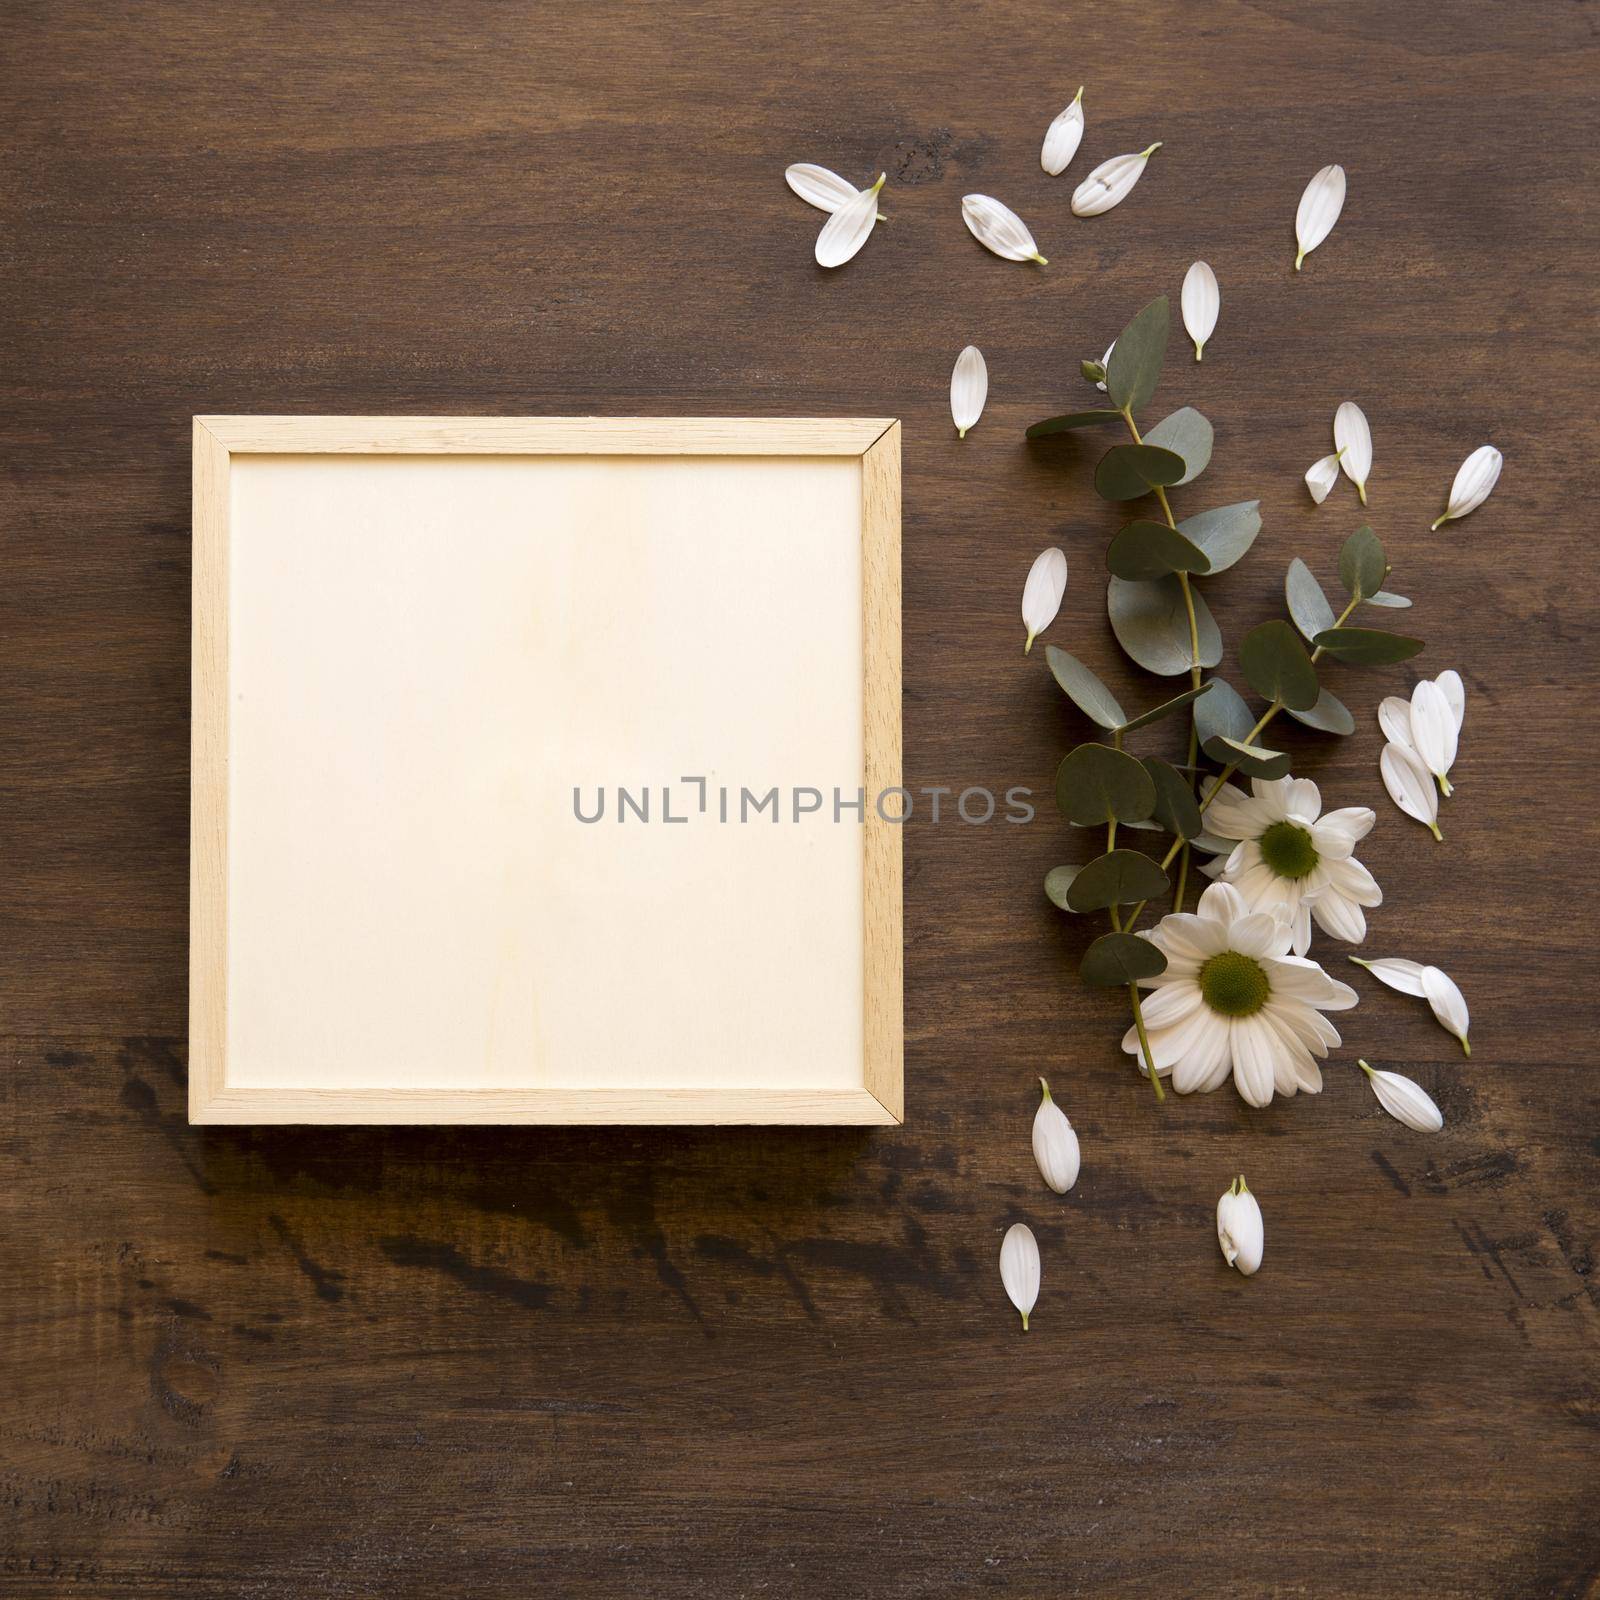 frame mockup with flowers. High quality beautiful photo concept by Zahard